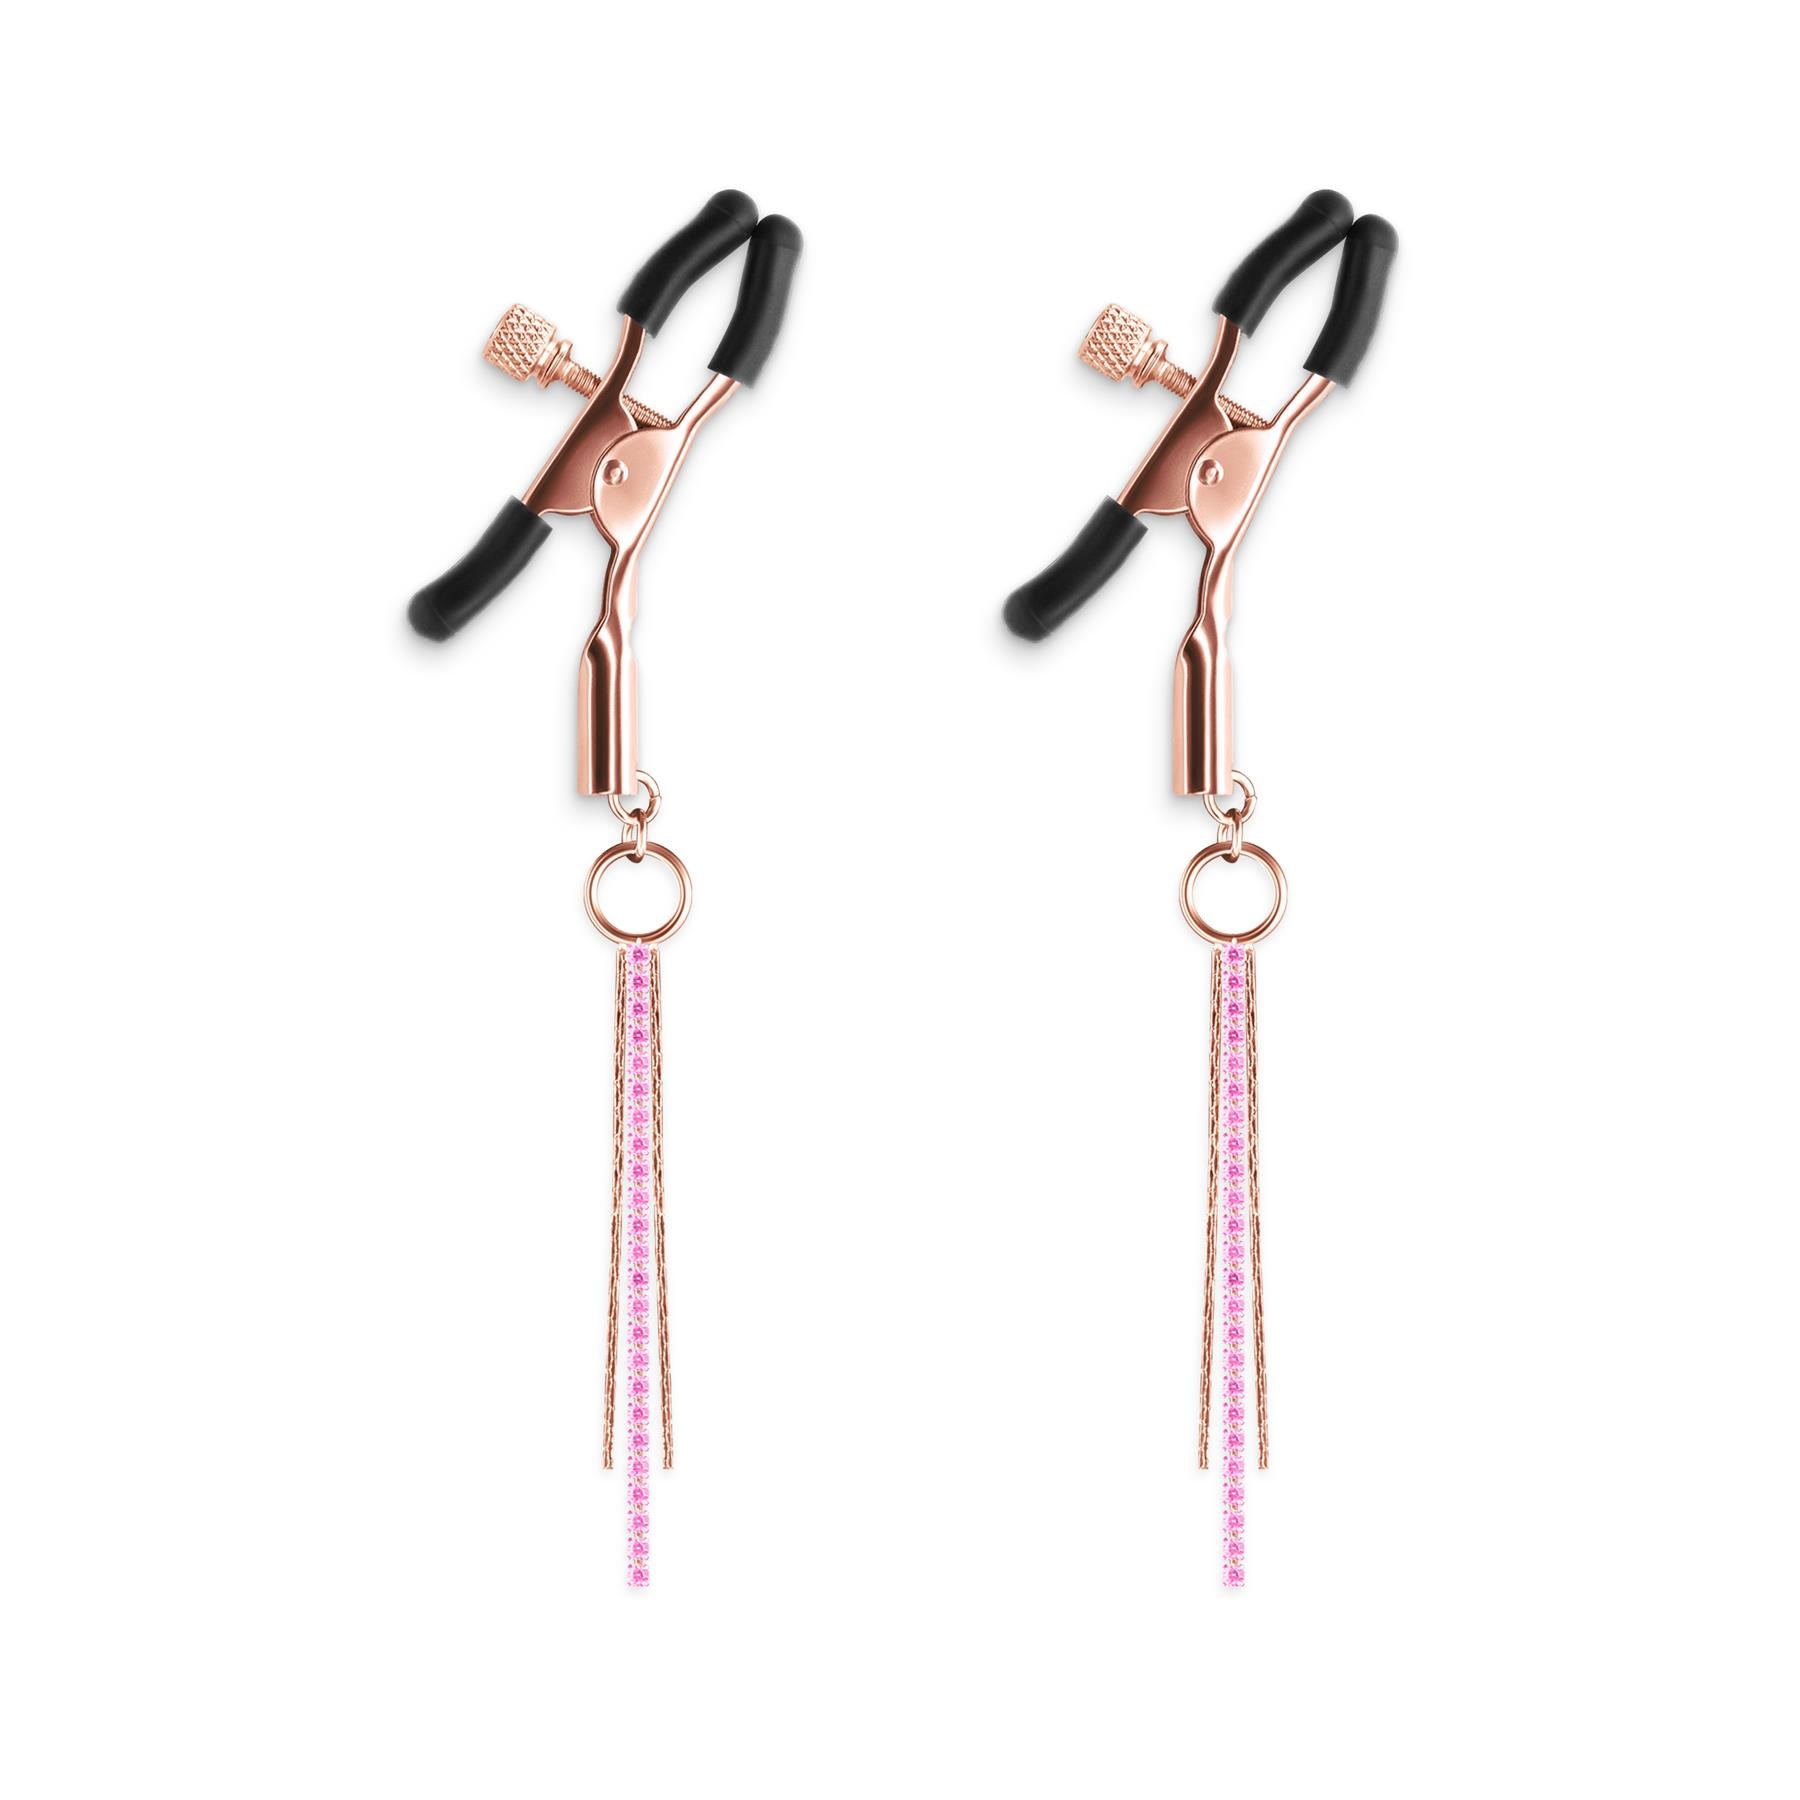 Bound Rose Gold Nipple Clamps With Jewel Chains - Product Shot